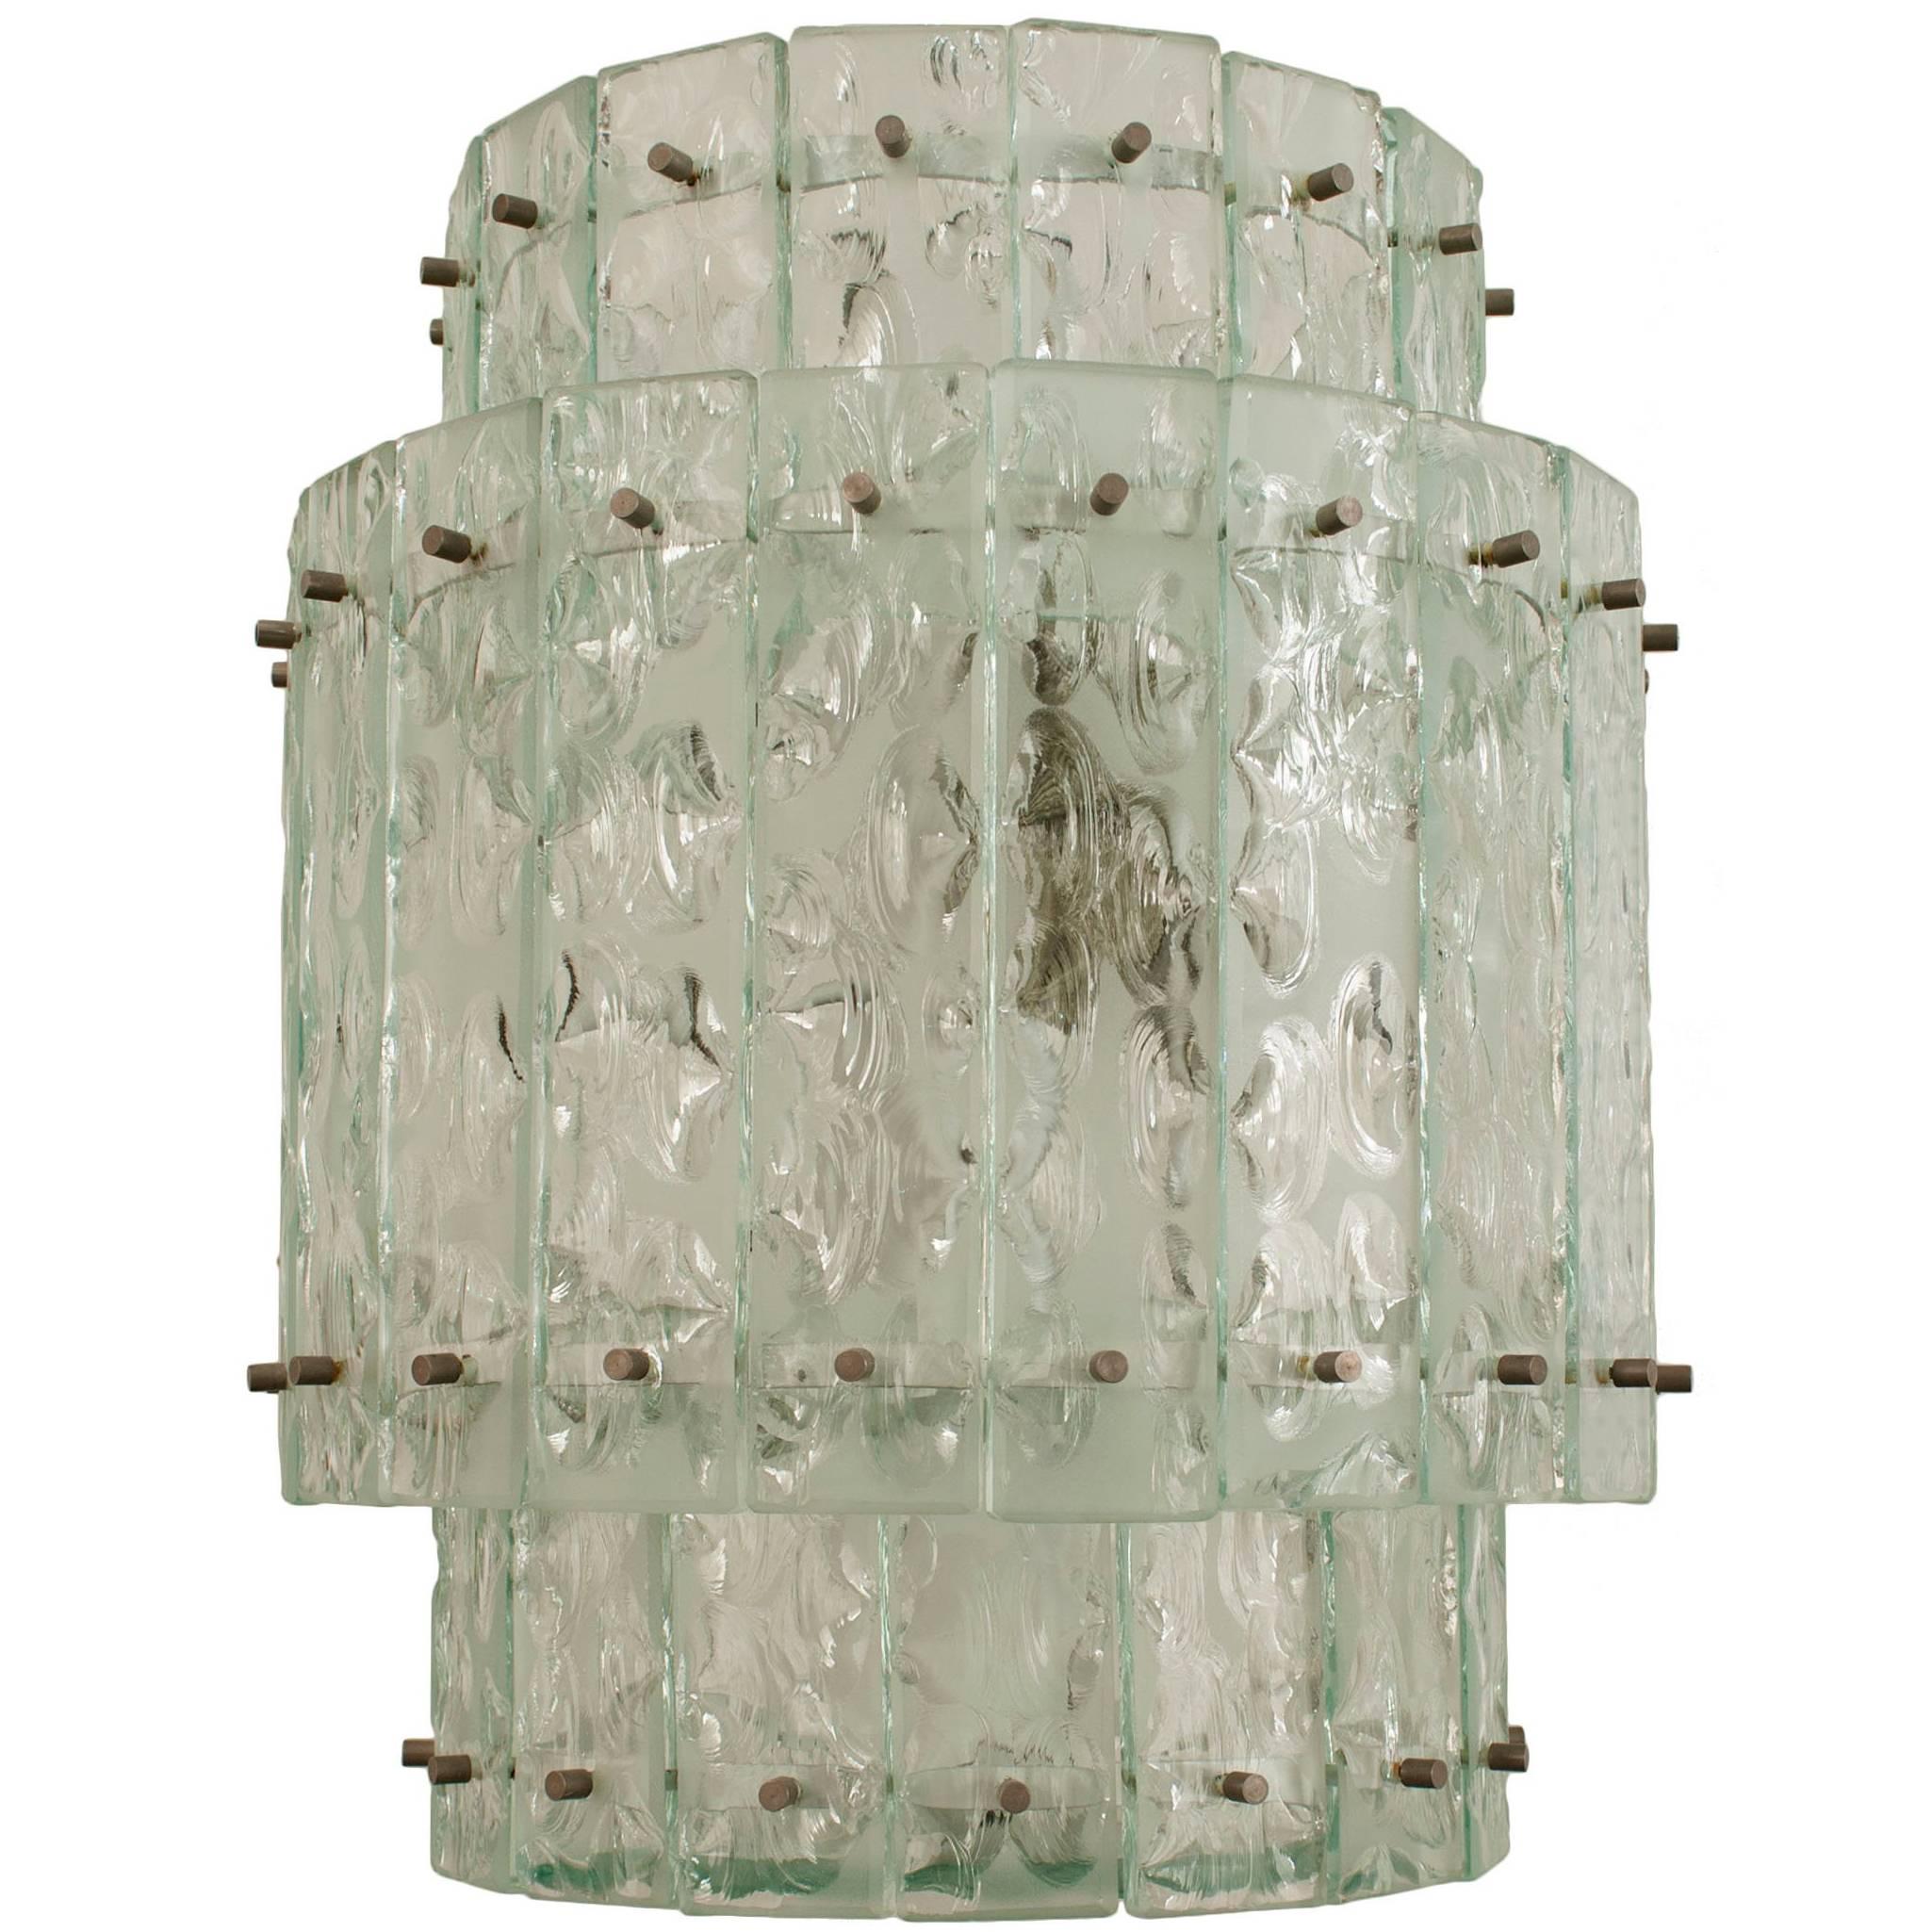 Italian Mid-Century Acid Etched Cylindrical Glass Lantern For Sale